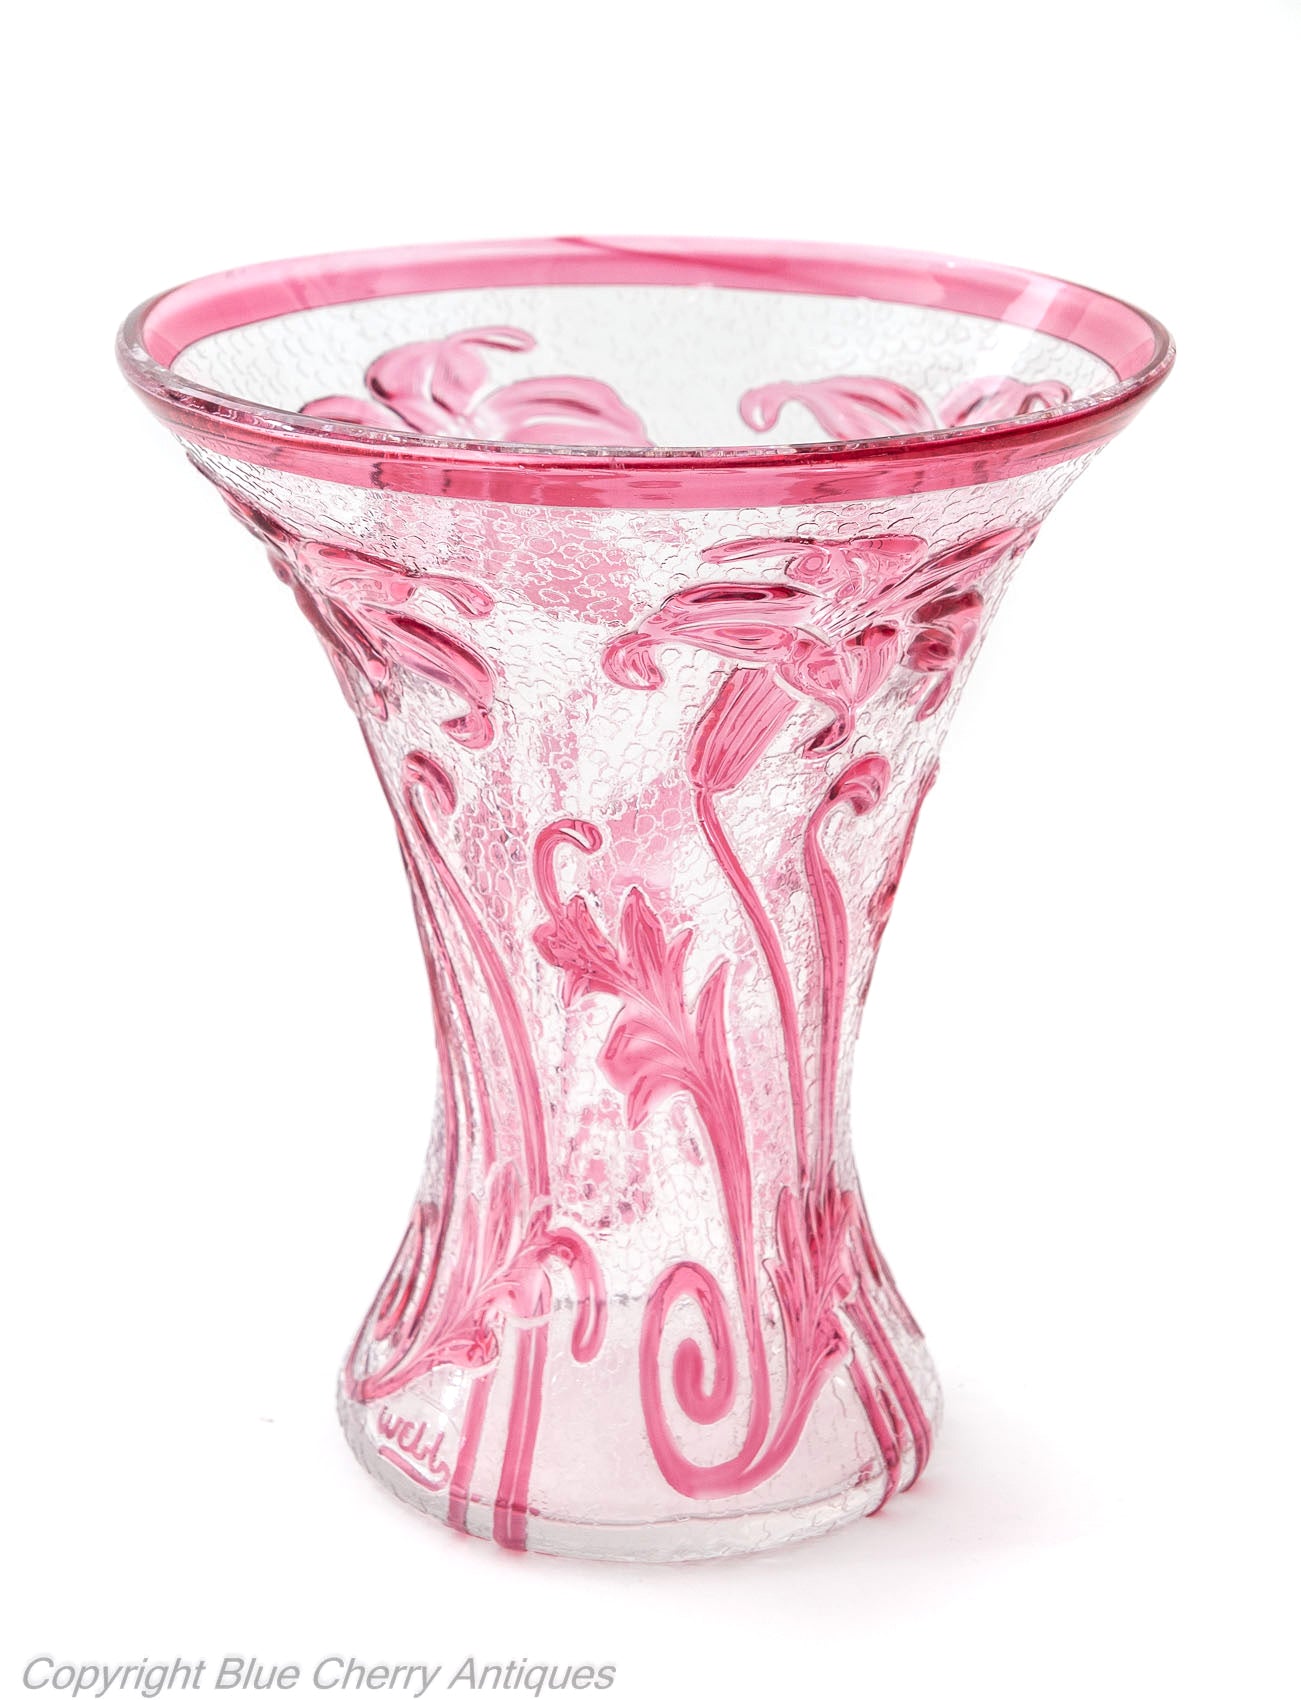 Thomas Webb Cameo Fleur Lily Pattern Art Glass Vase in Cranberry and Clear (Code 1766)